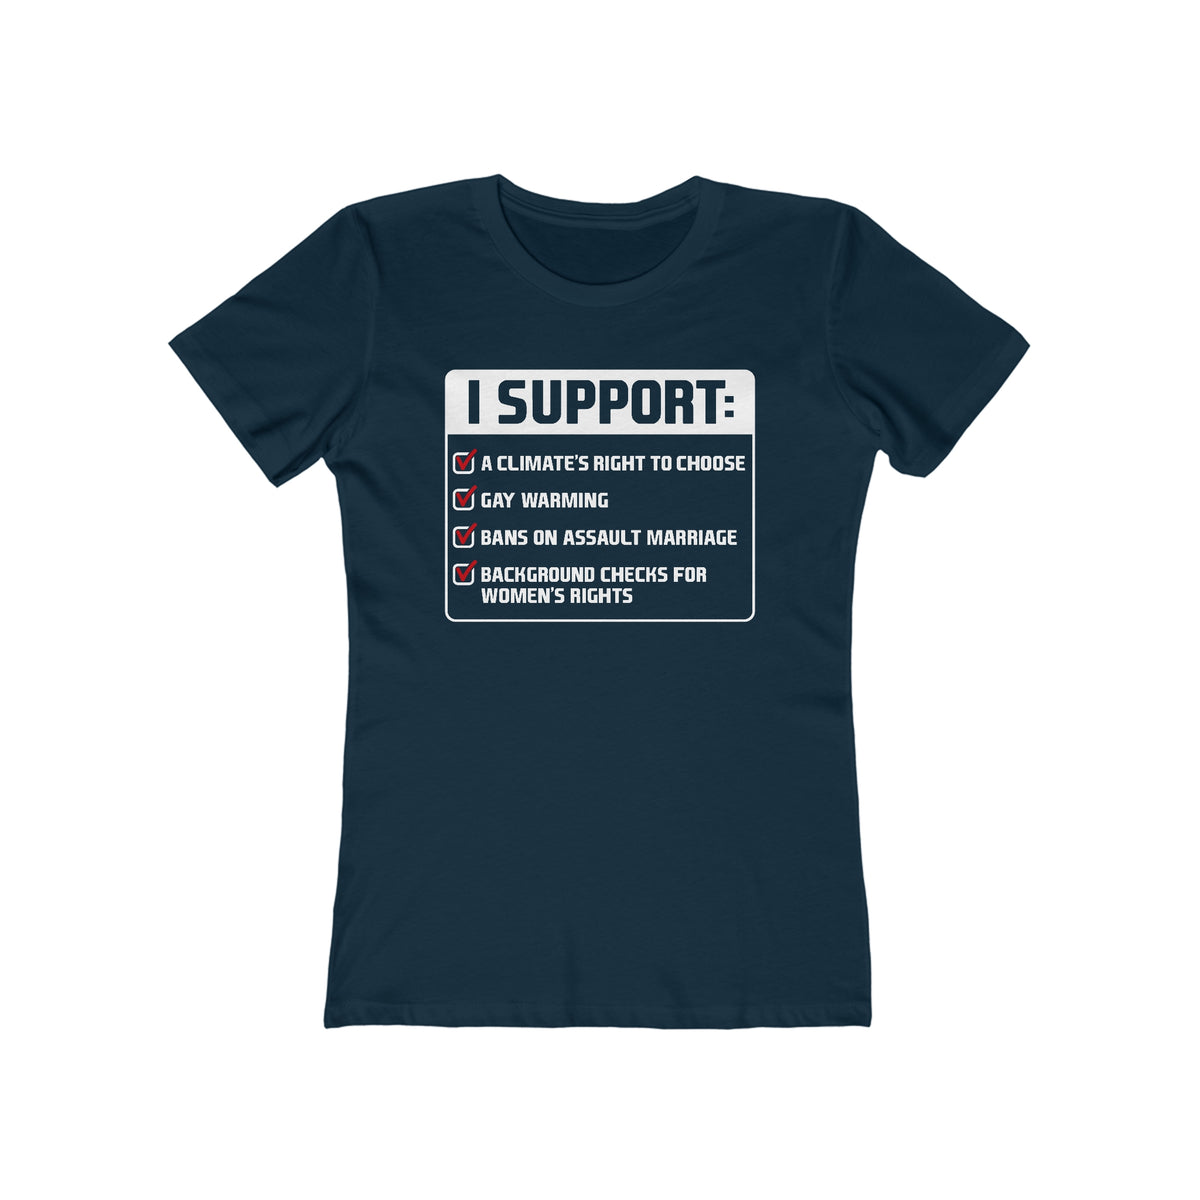 I Support A Climate's Right To Choose  - Women’s T-Shirt